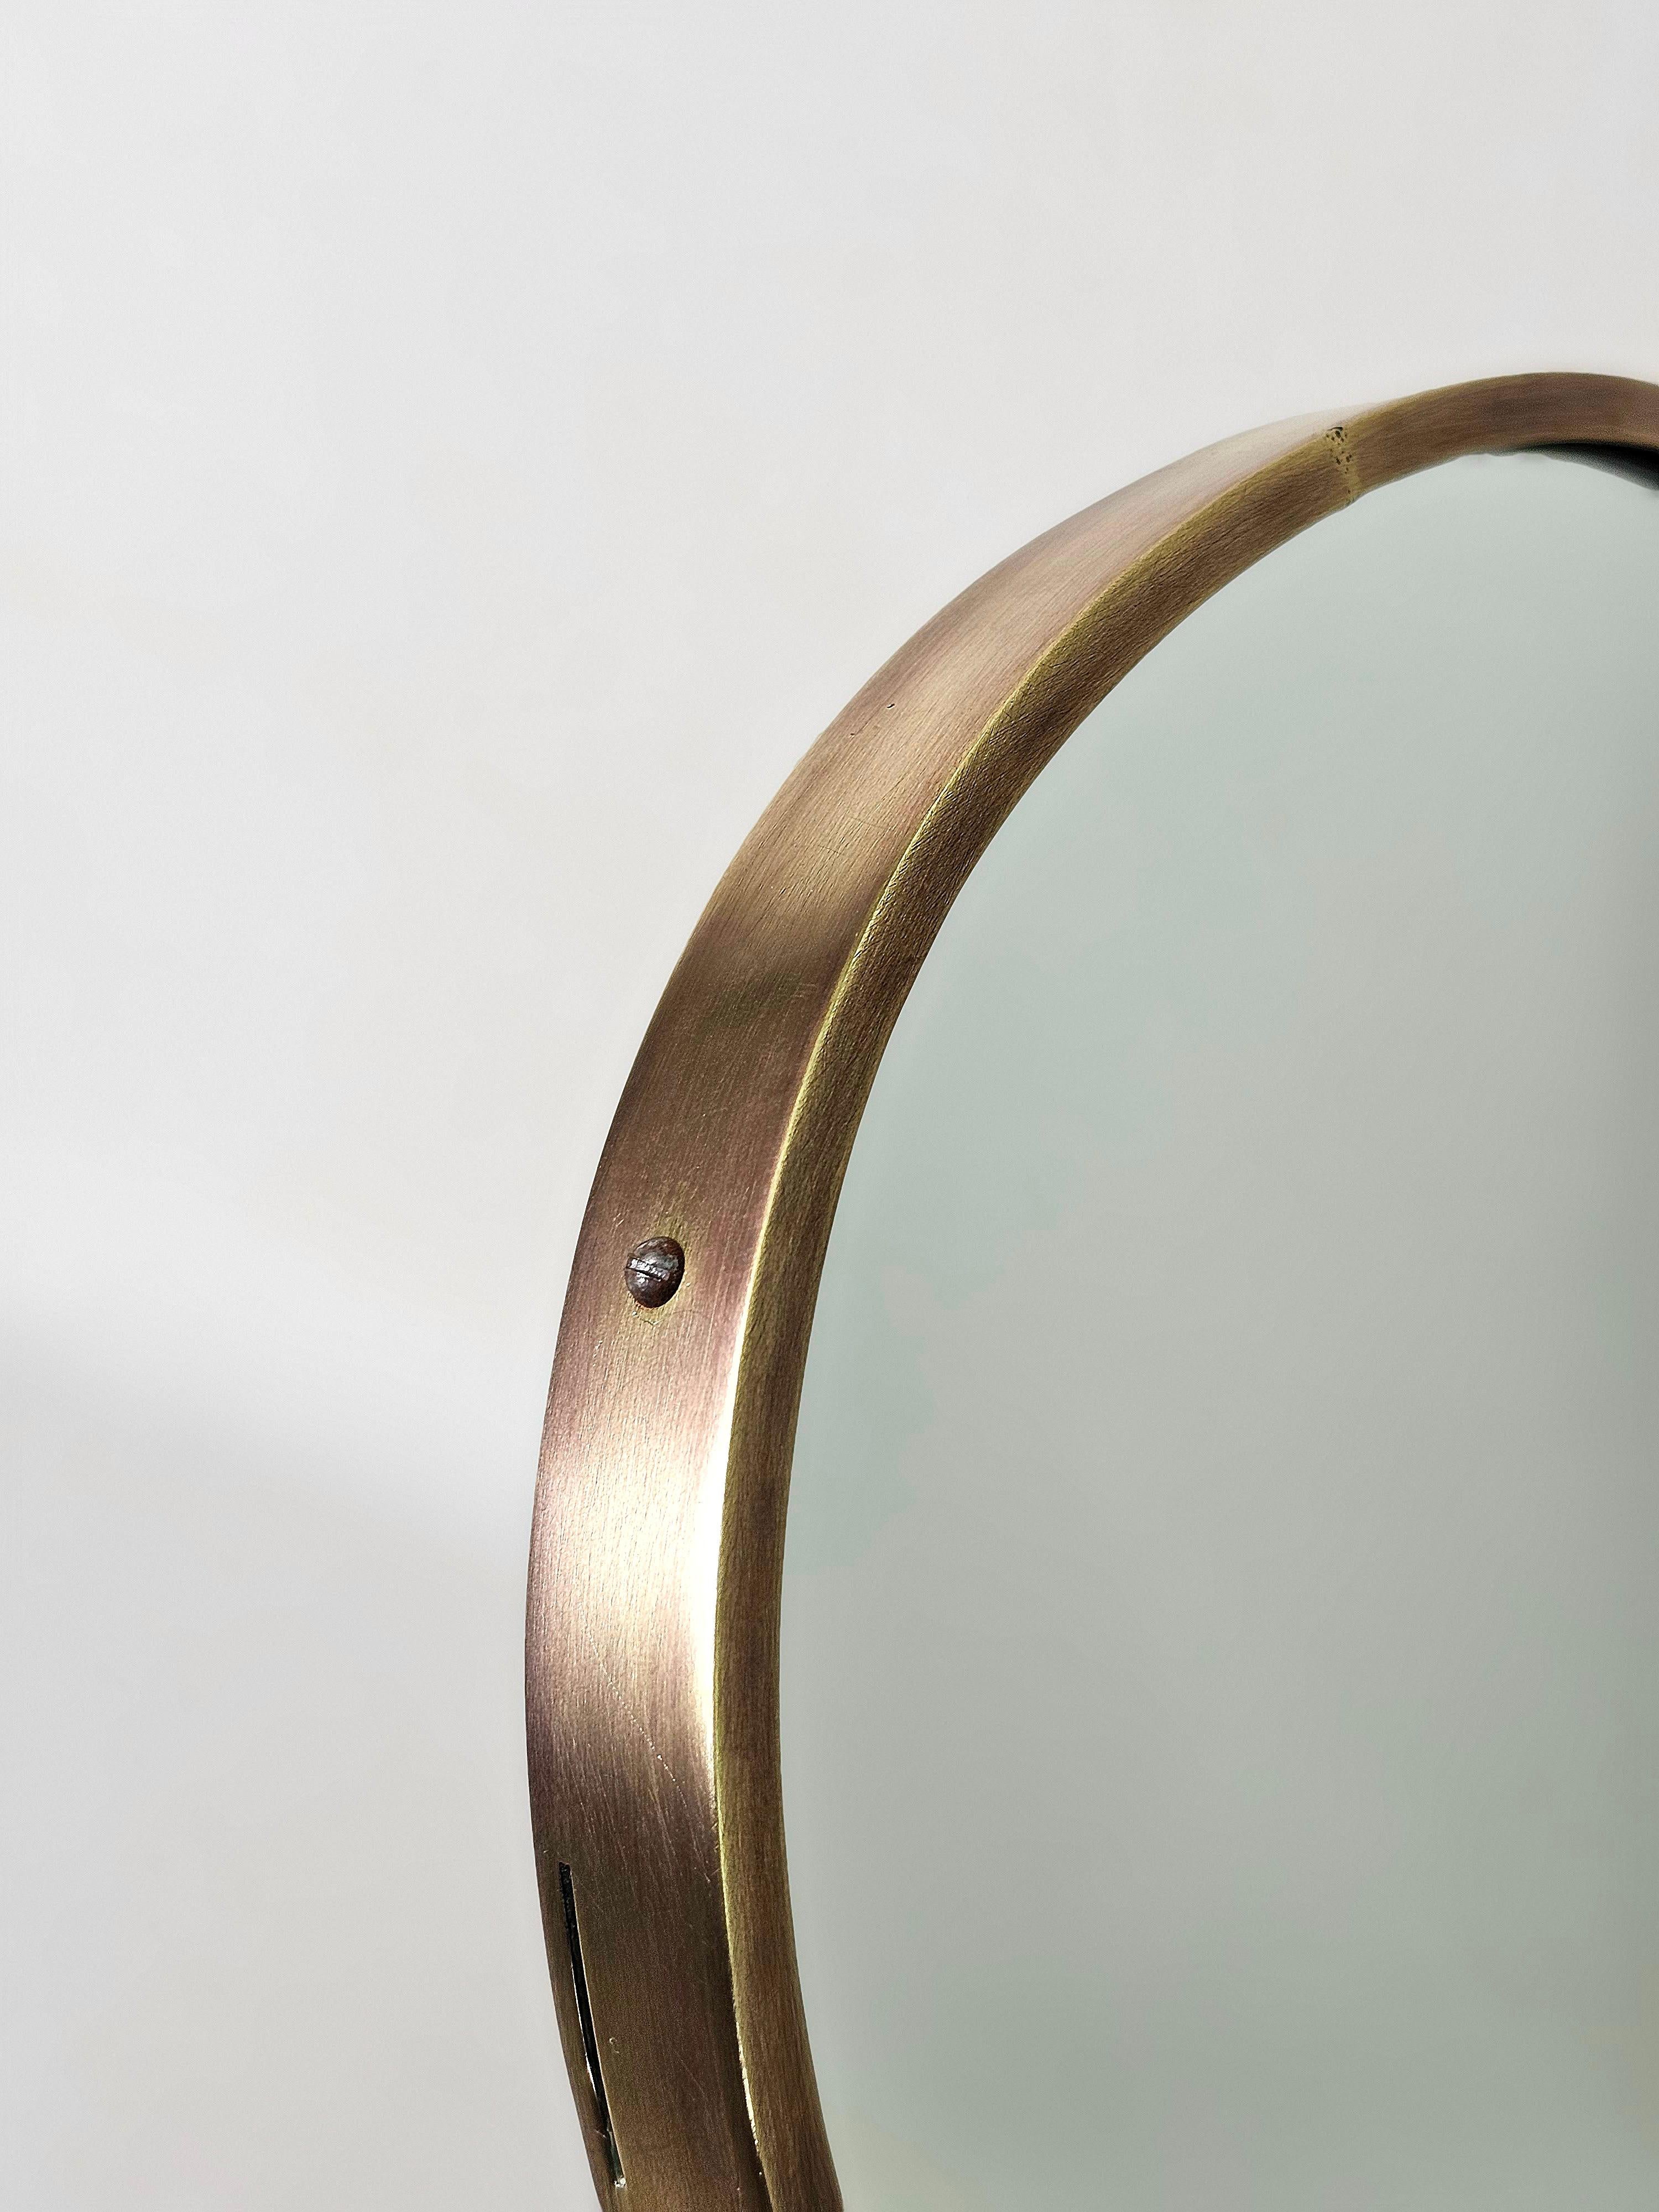 Table Mirror Brass Brushed Midcentury Modern Italian Design 1950s For Sale 5